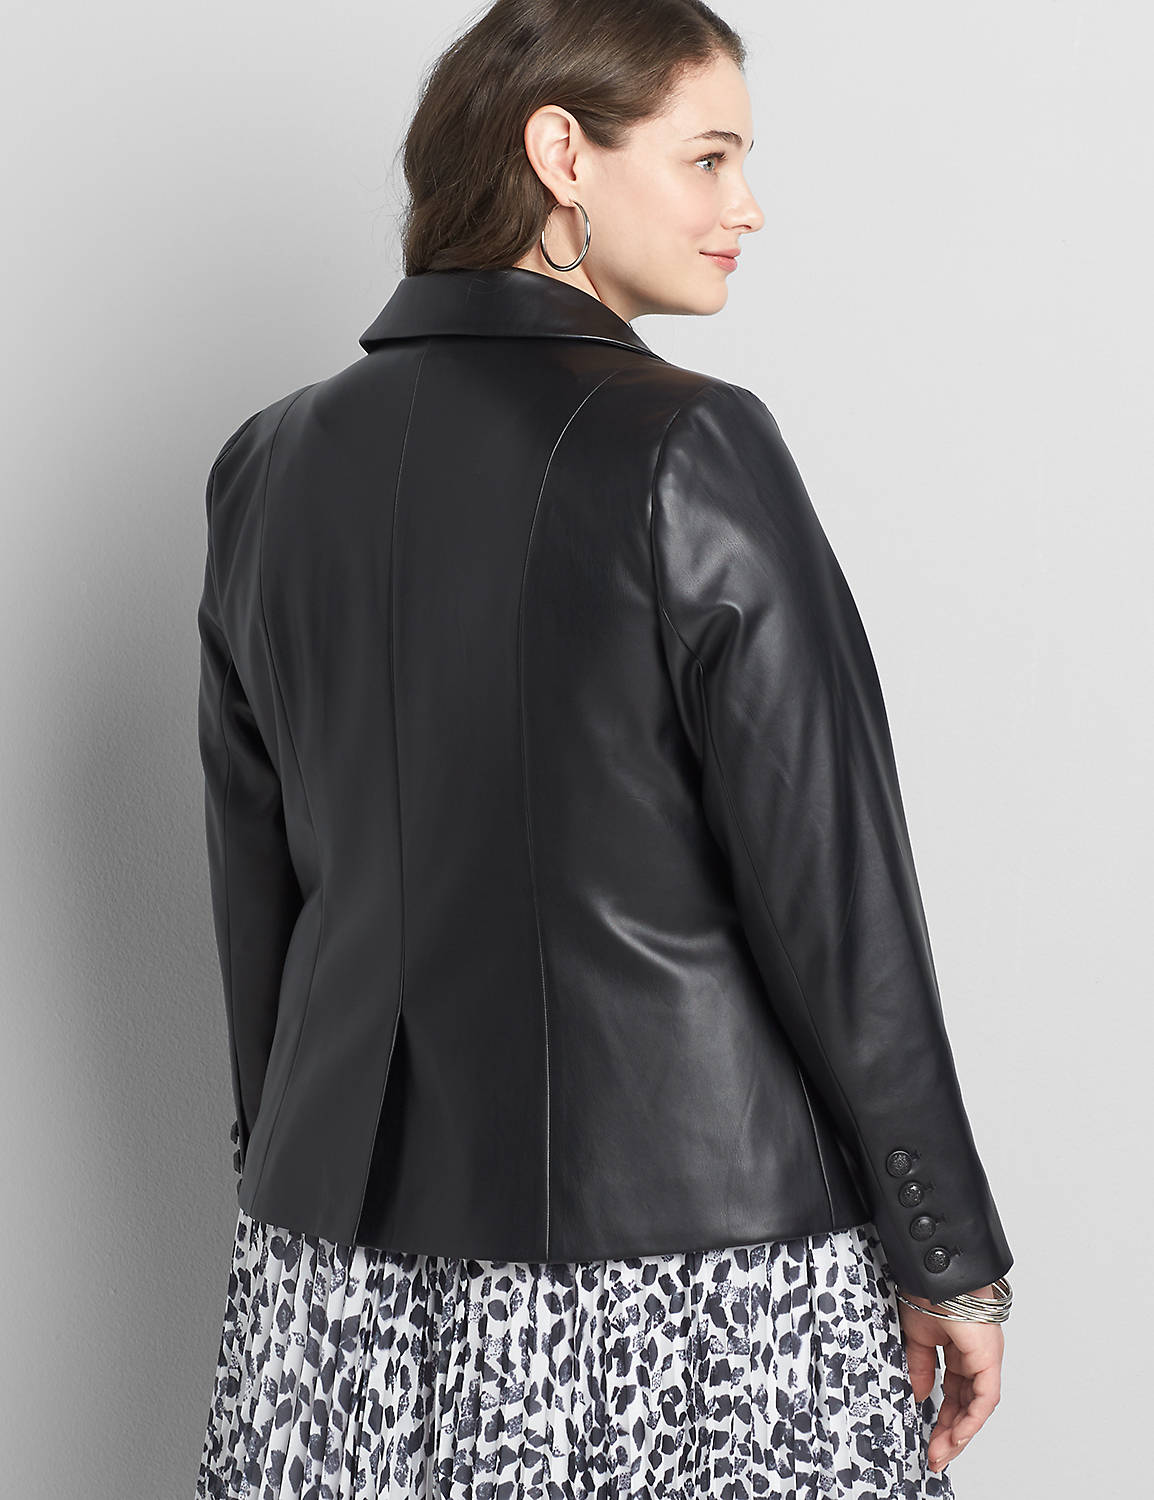 Faux-Leather Double-Breasted Blazer Product Image 2